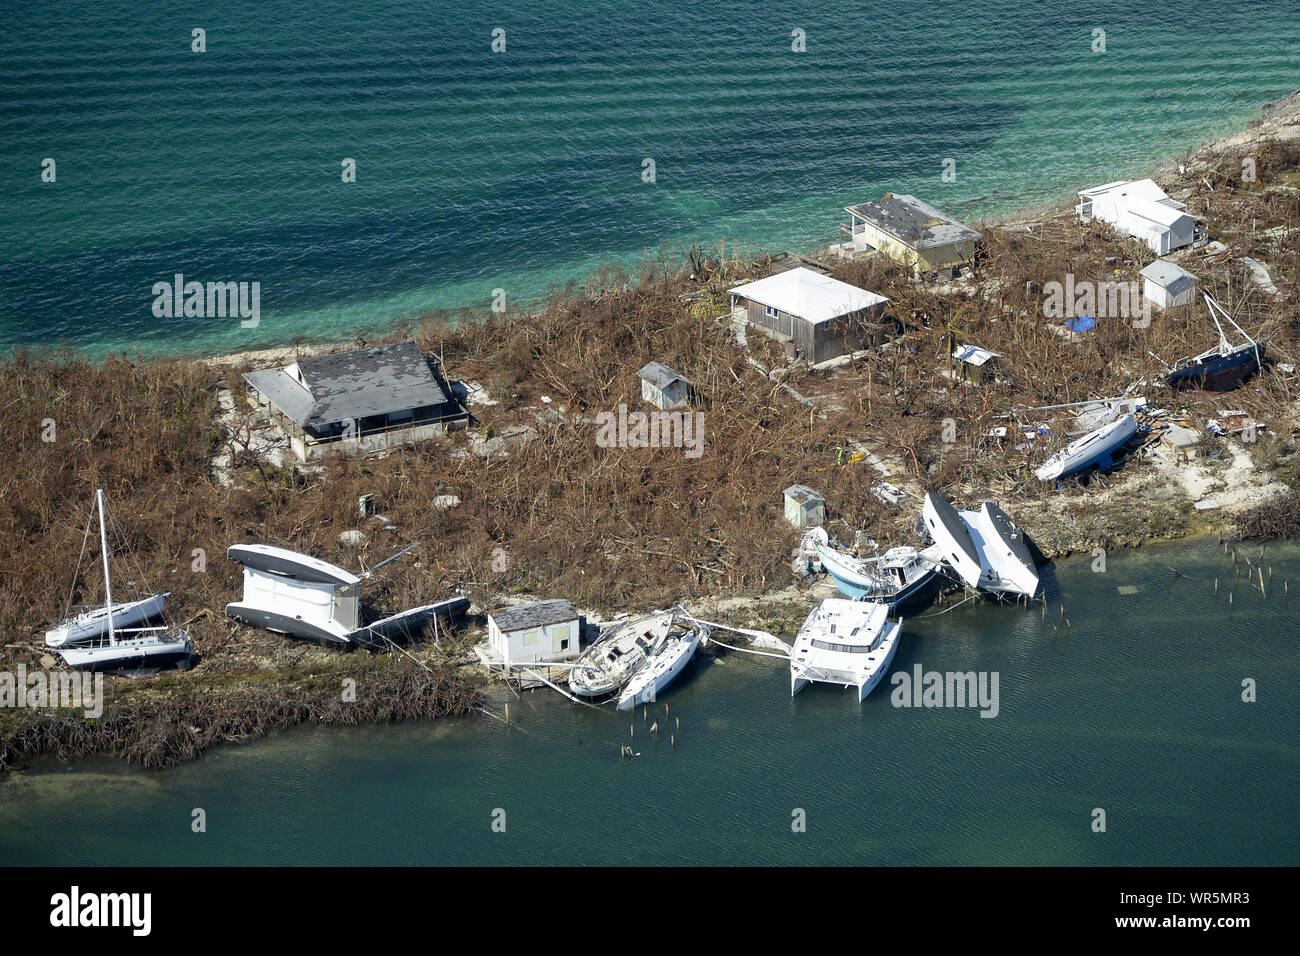 Bahamas. 9th Sep 2019. A survey flight was conducted over the Islands of the Bahamas on Monday, September 9, 2019. The survey revealed a stripped landscape and tremendous damage done by Hurricane Dorian. The flight was sponsored by 'Shipwreck Park', a 501 (c) (3) corporation which is responsible for the acceptance and distribution of relief goods, consumables and medical supplies for the island chain. Credit: UPI/Alamy Live News Stock Photo